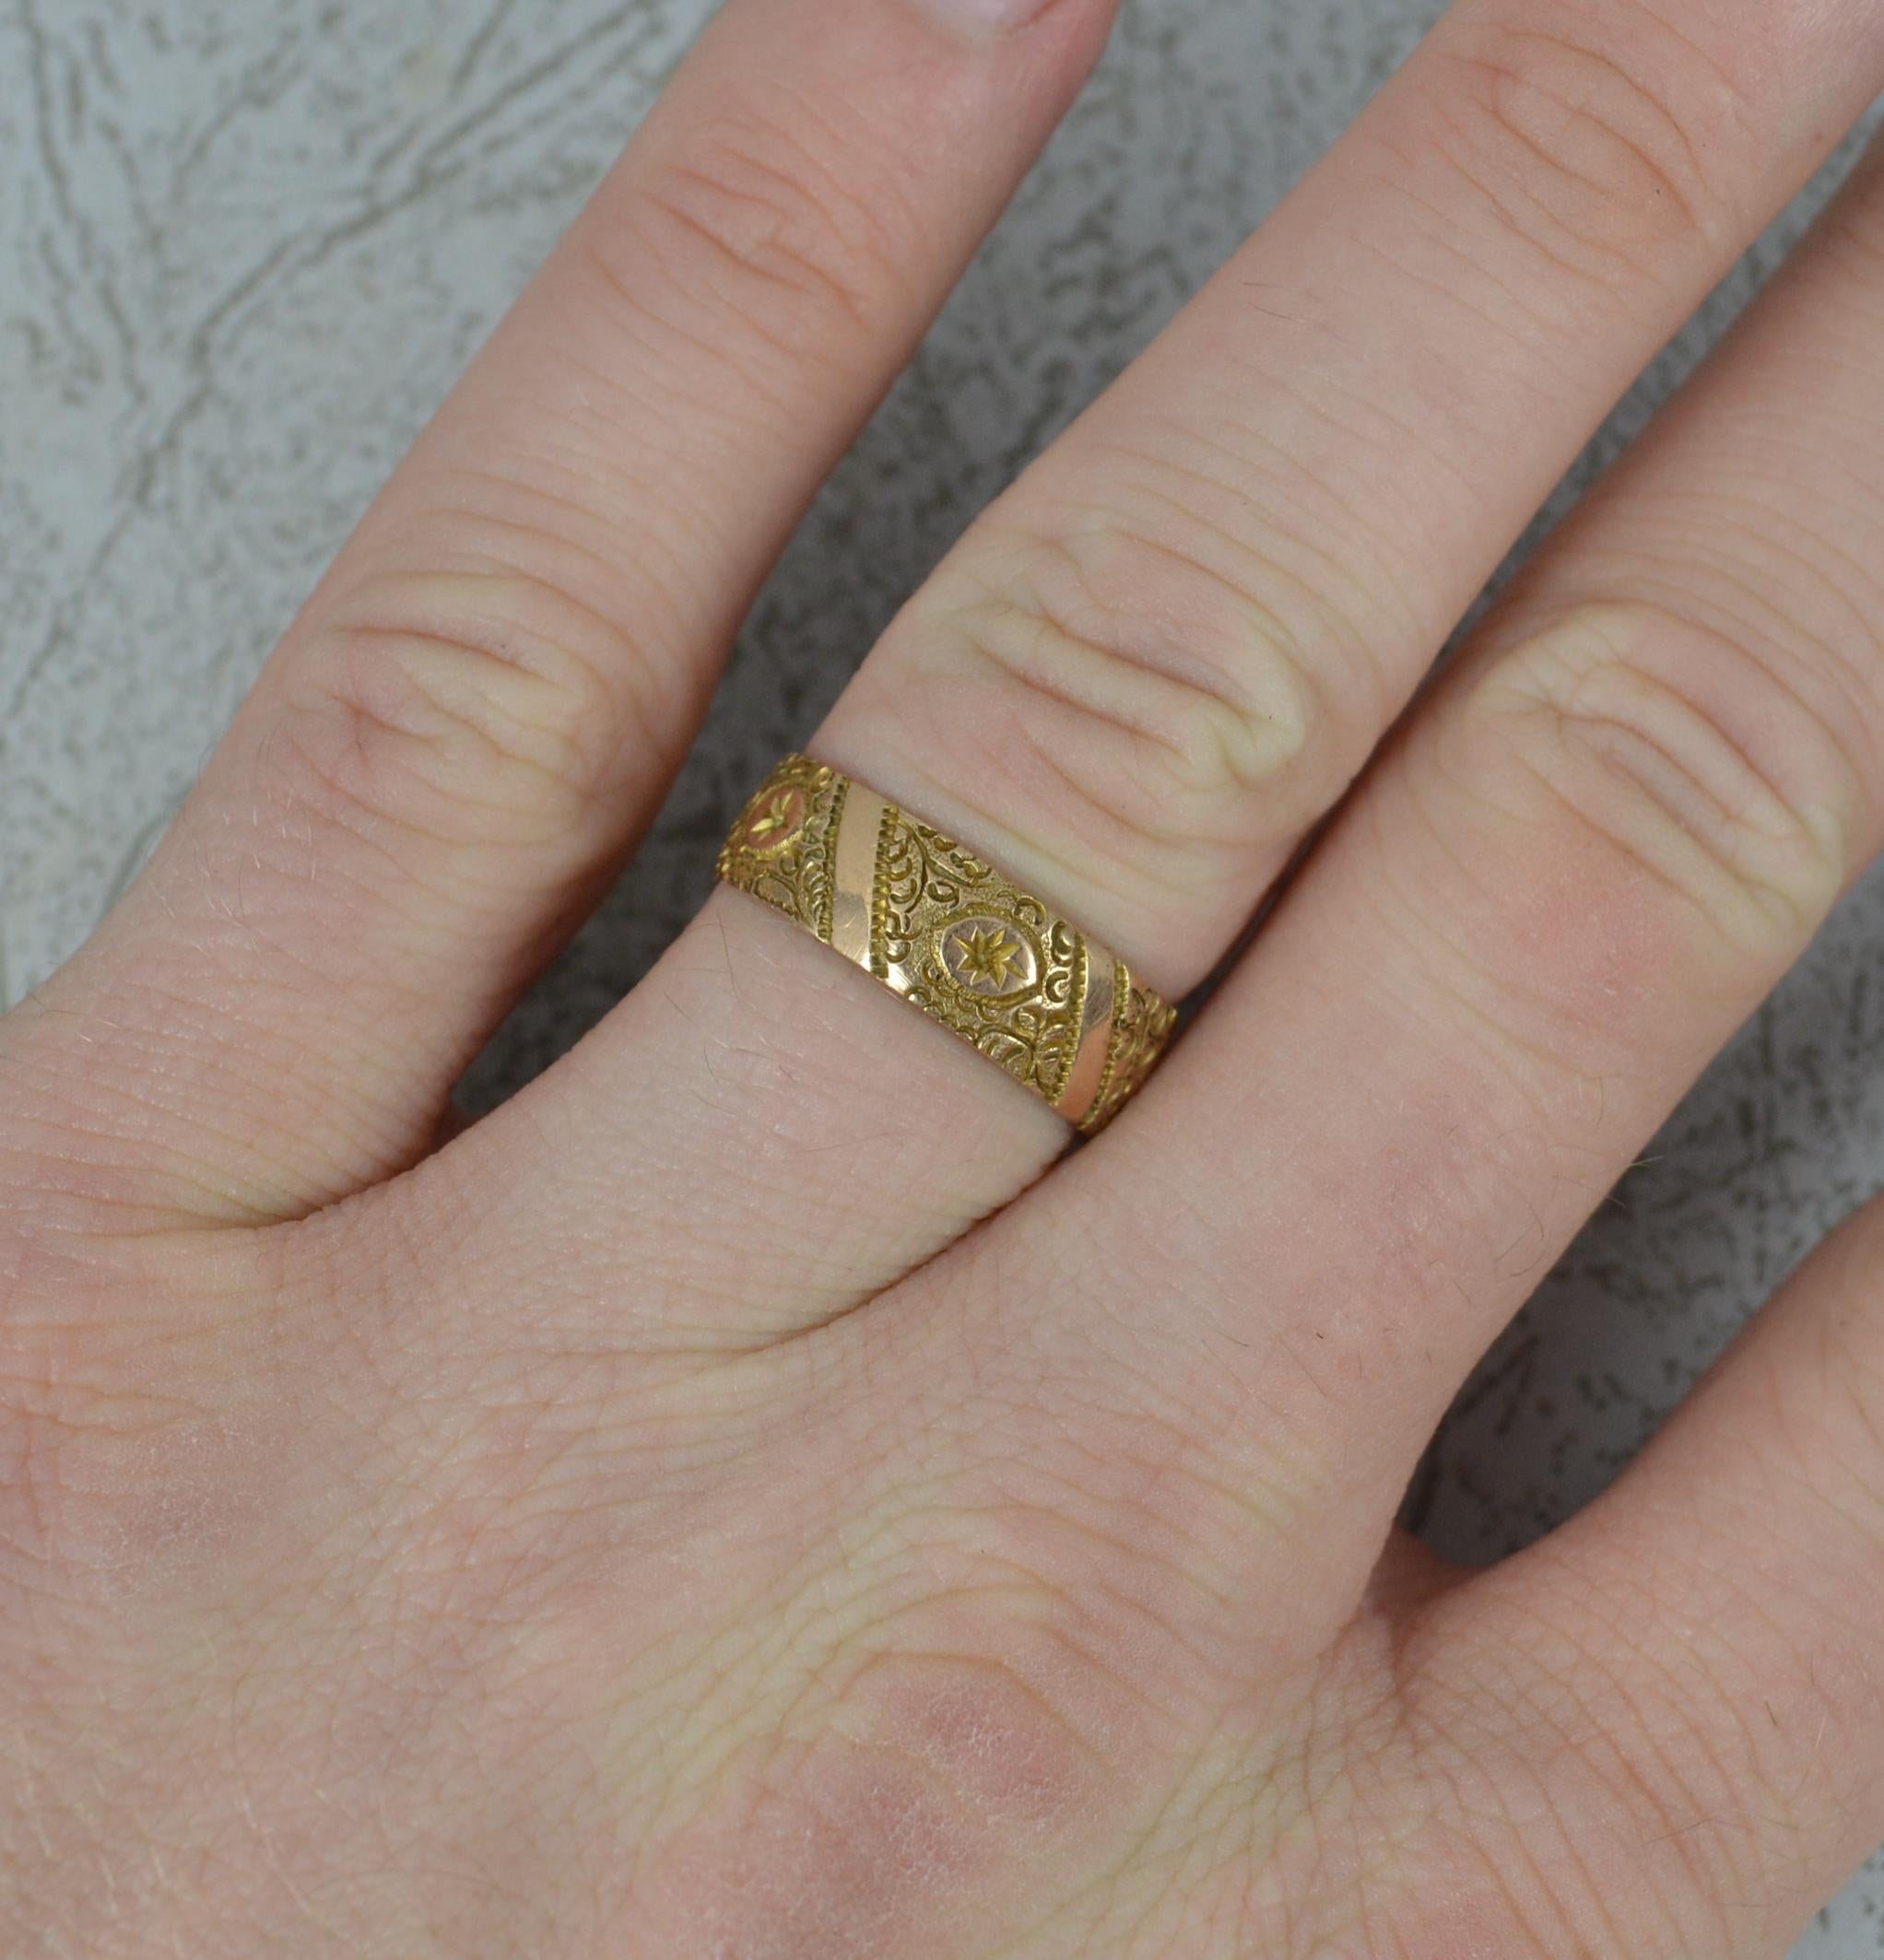 A superb early Victorian band ring.
Solid 9 carat rose gold example.
6mm wide throughout.
A full eternity engraved band throughout. 

CONDITION ; Very good for age. Very crisp pattern and hallmarks. Please view photographs.

WEIGHT ; 2.8 grams
SIZE